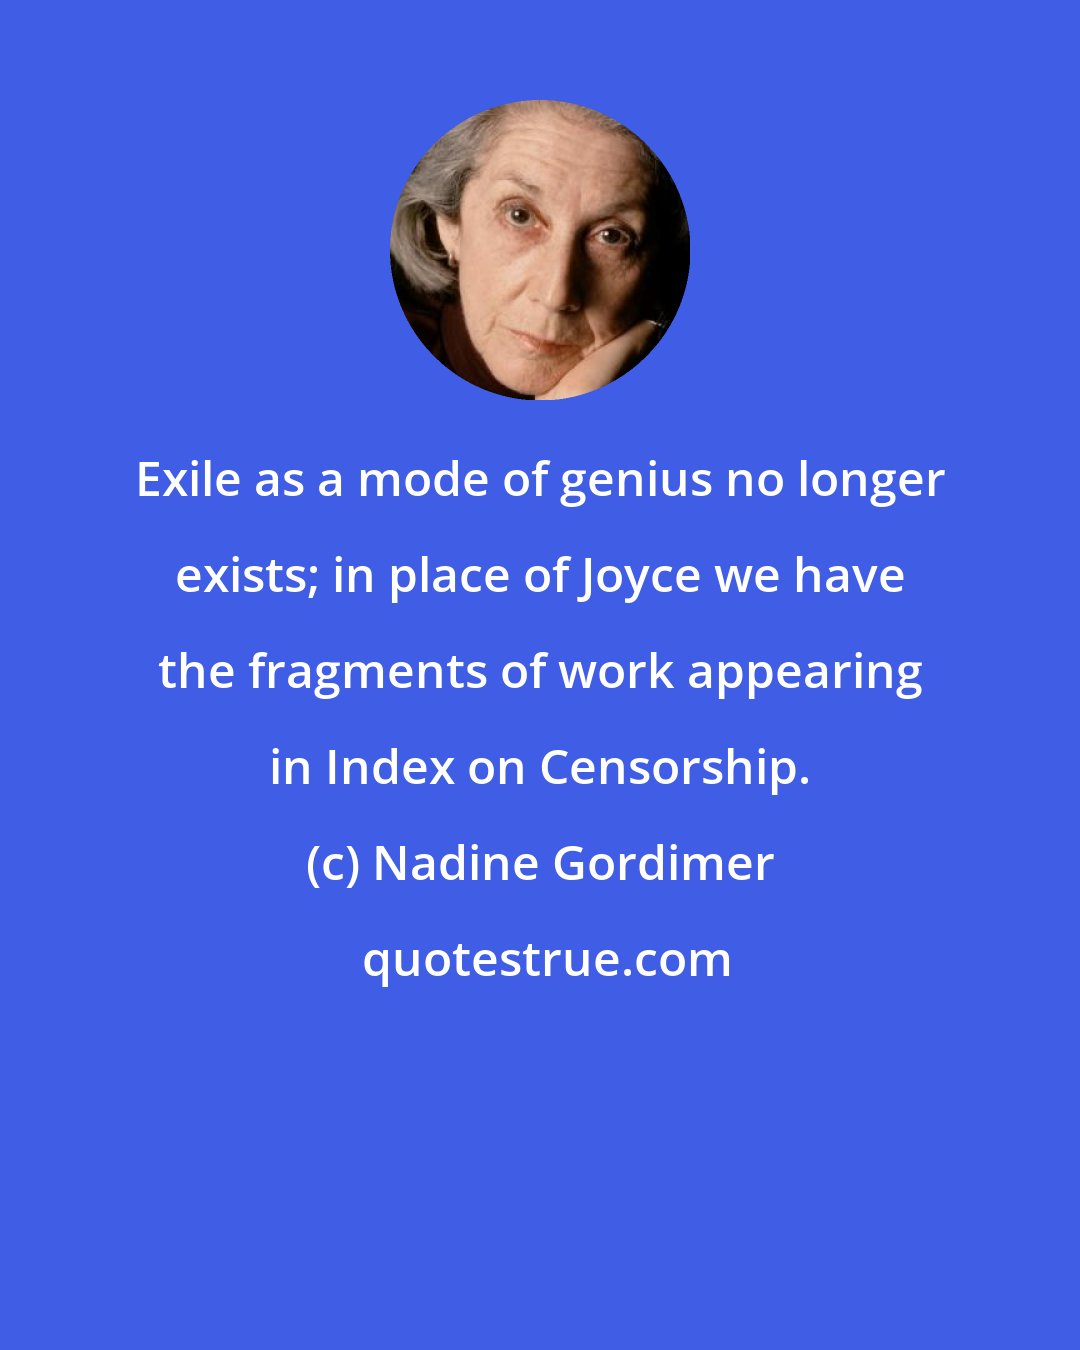 Nadine Gordimer: Exile as a mode of genius no longer exists; in place of Joyce we have the fragments of work appearing in Index on Censorship.